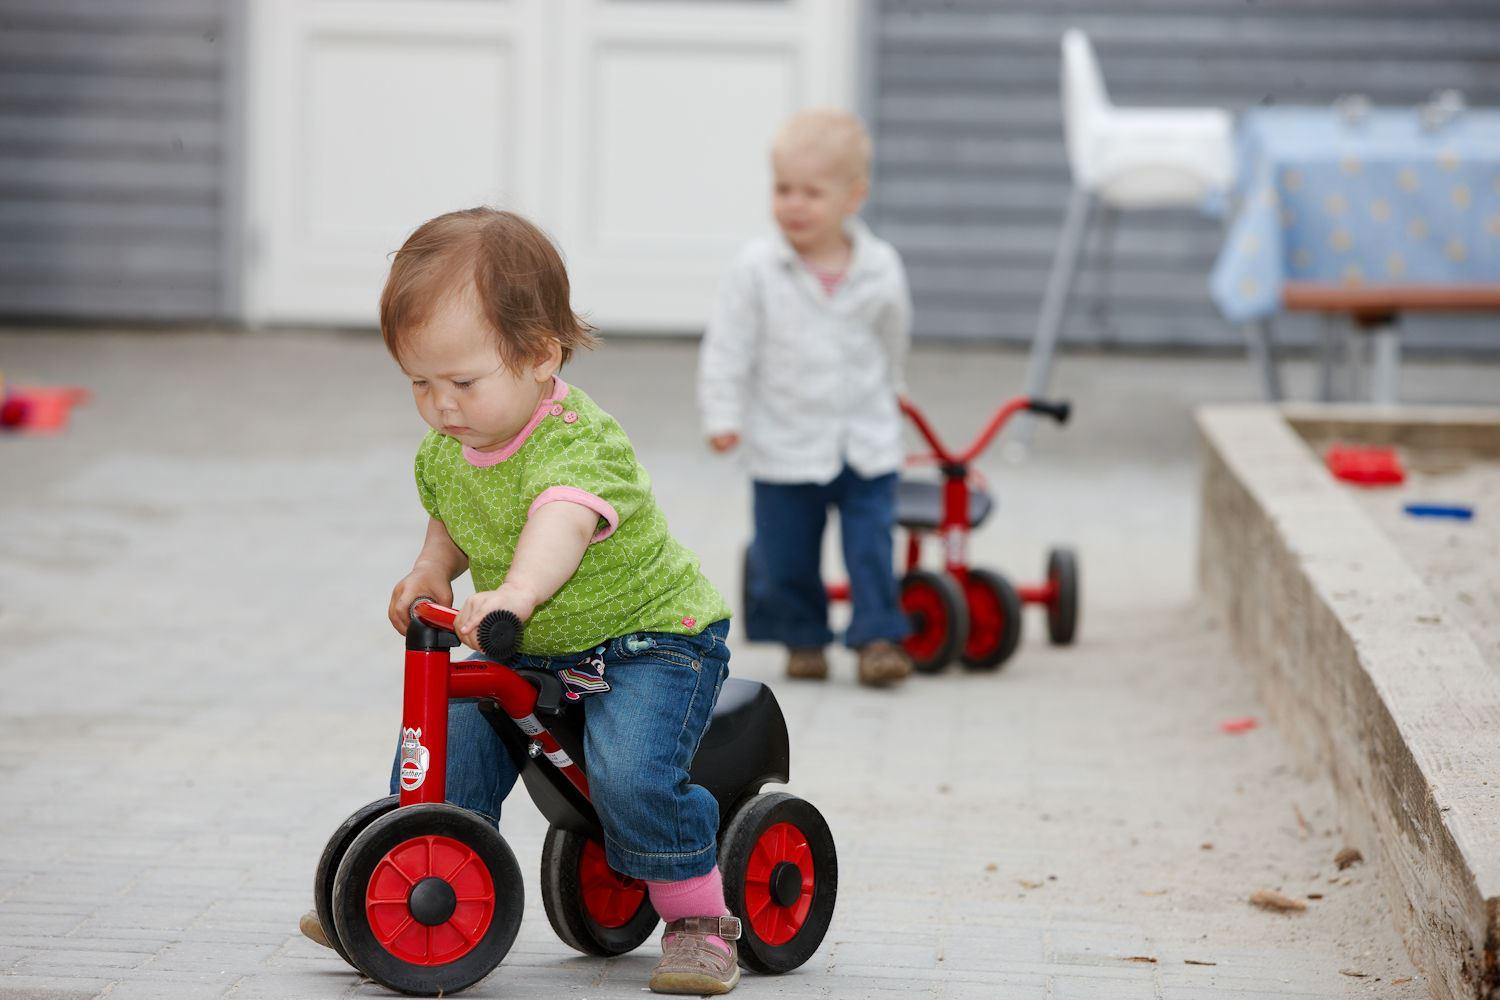 Mini Rutsch Safety Scooter in Aktion - Serie MINI Winther Viking (1-4 Jahre)